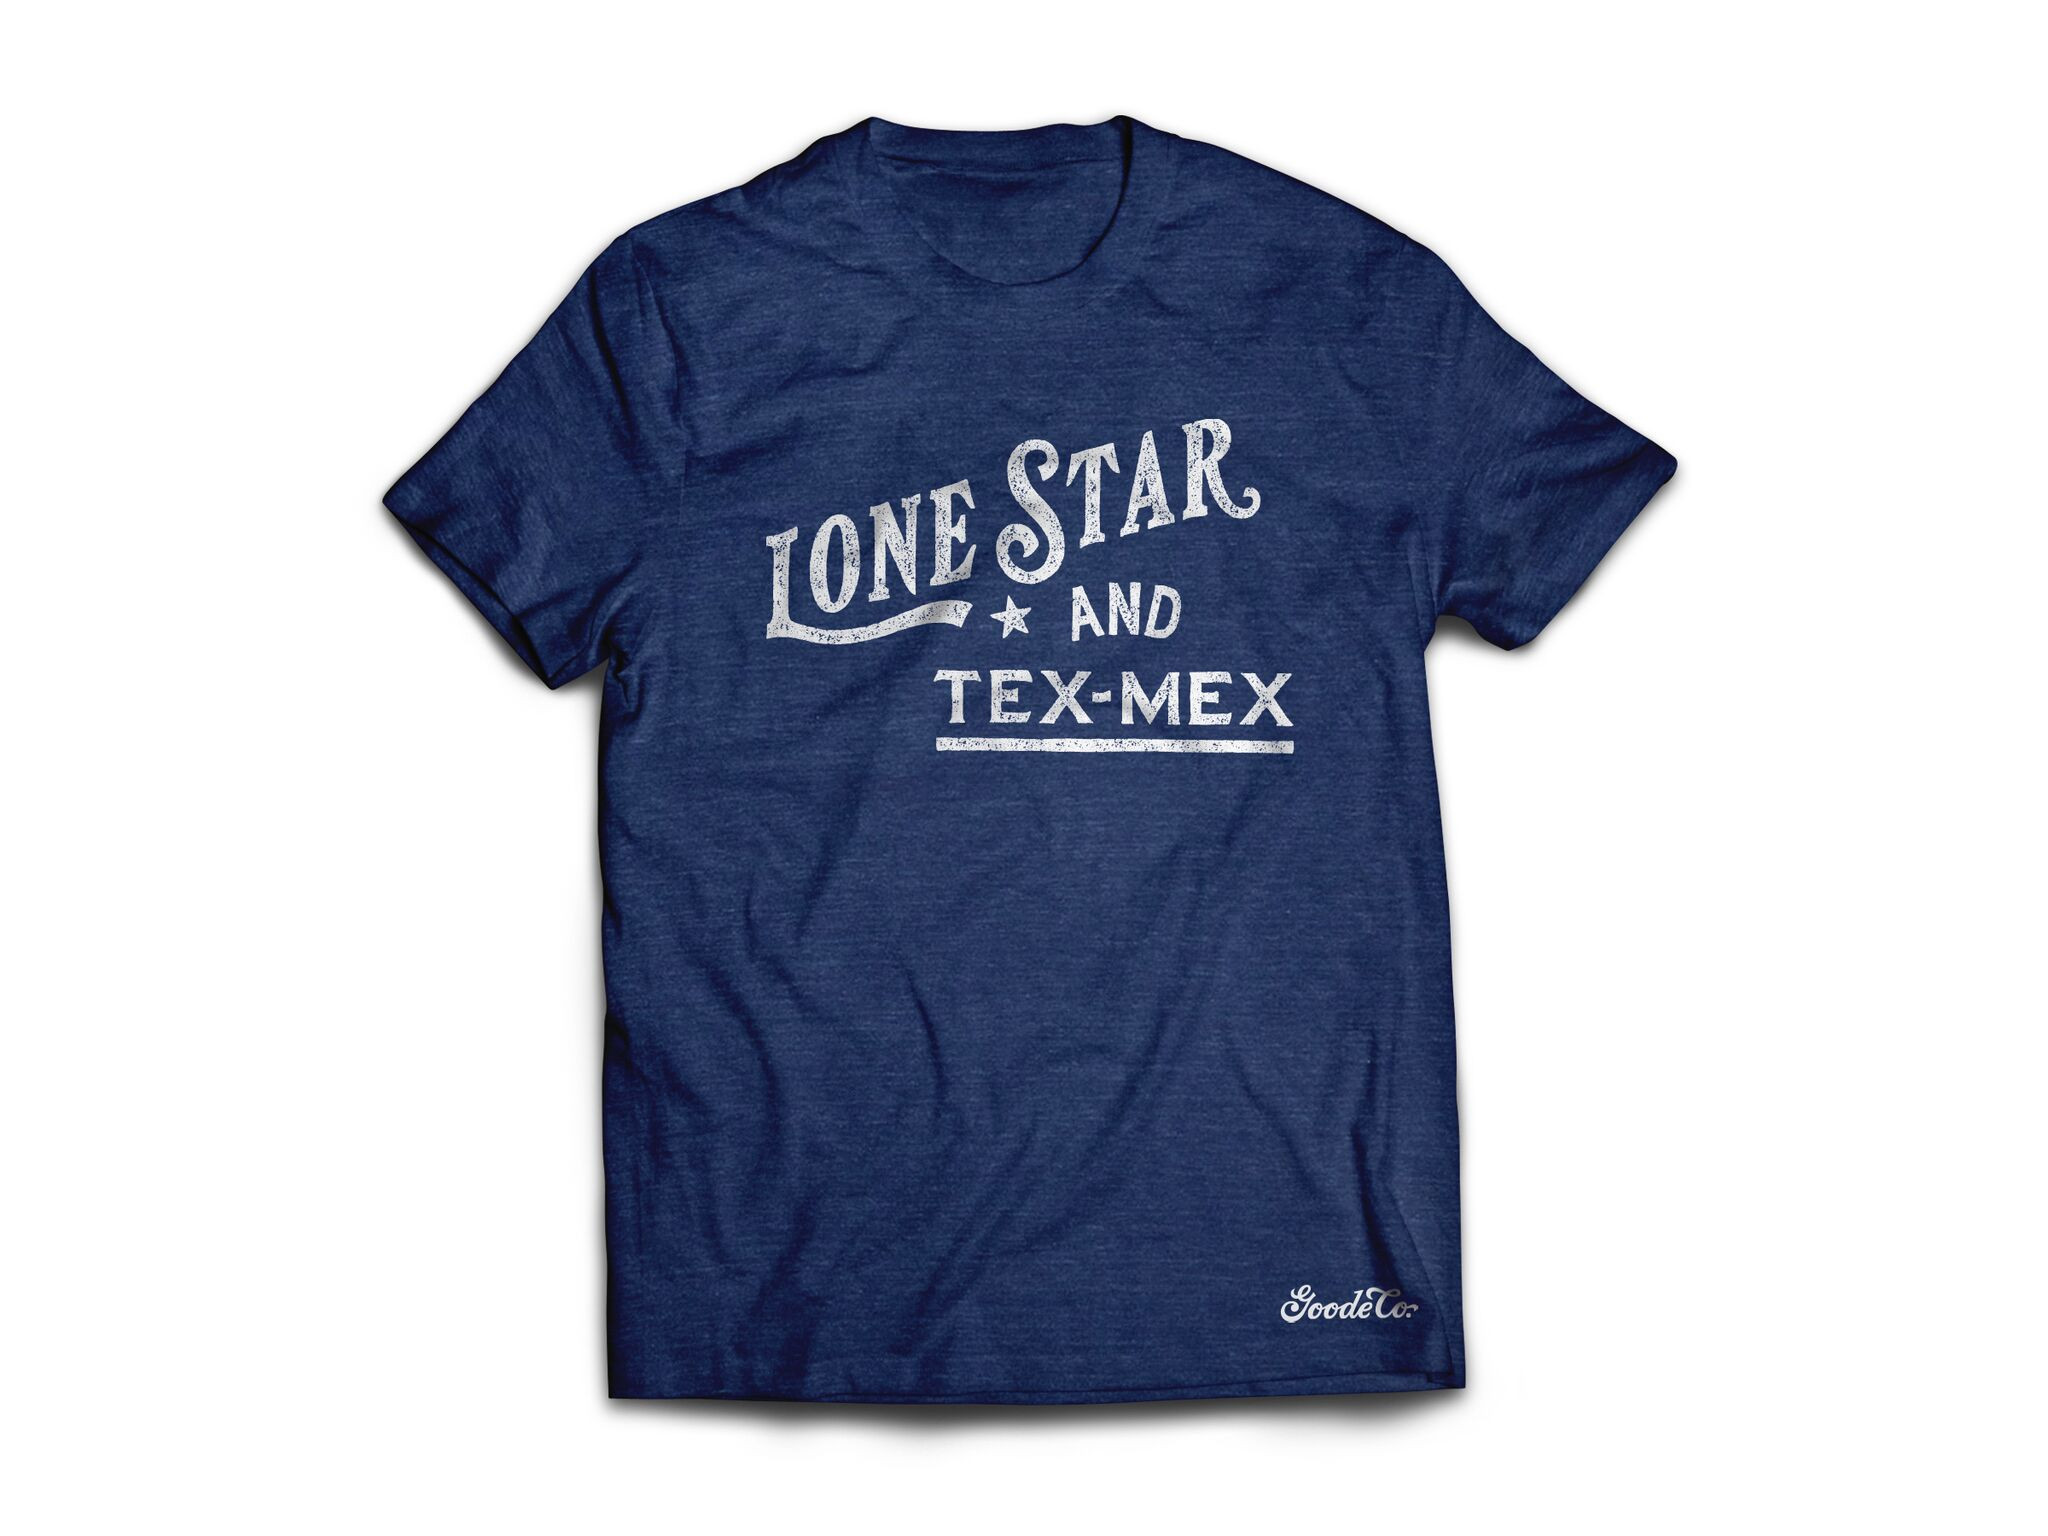 Product photo for Goode Co's "Lone Star & Tex-Mex" t-shirt.